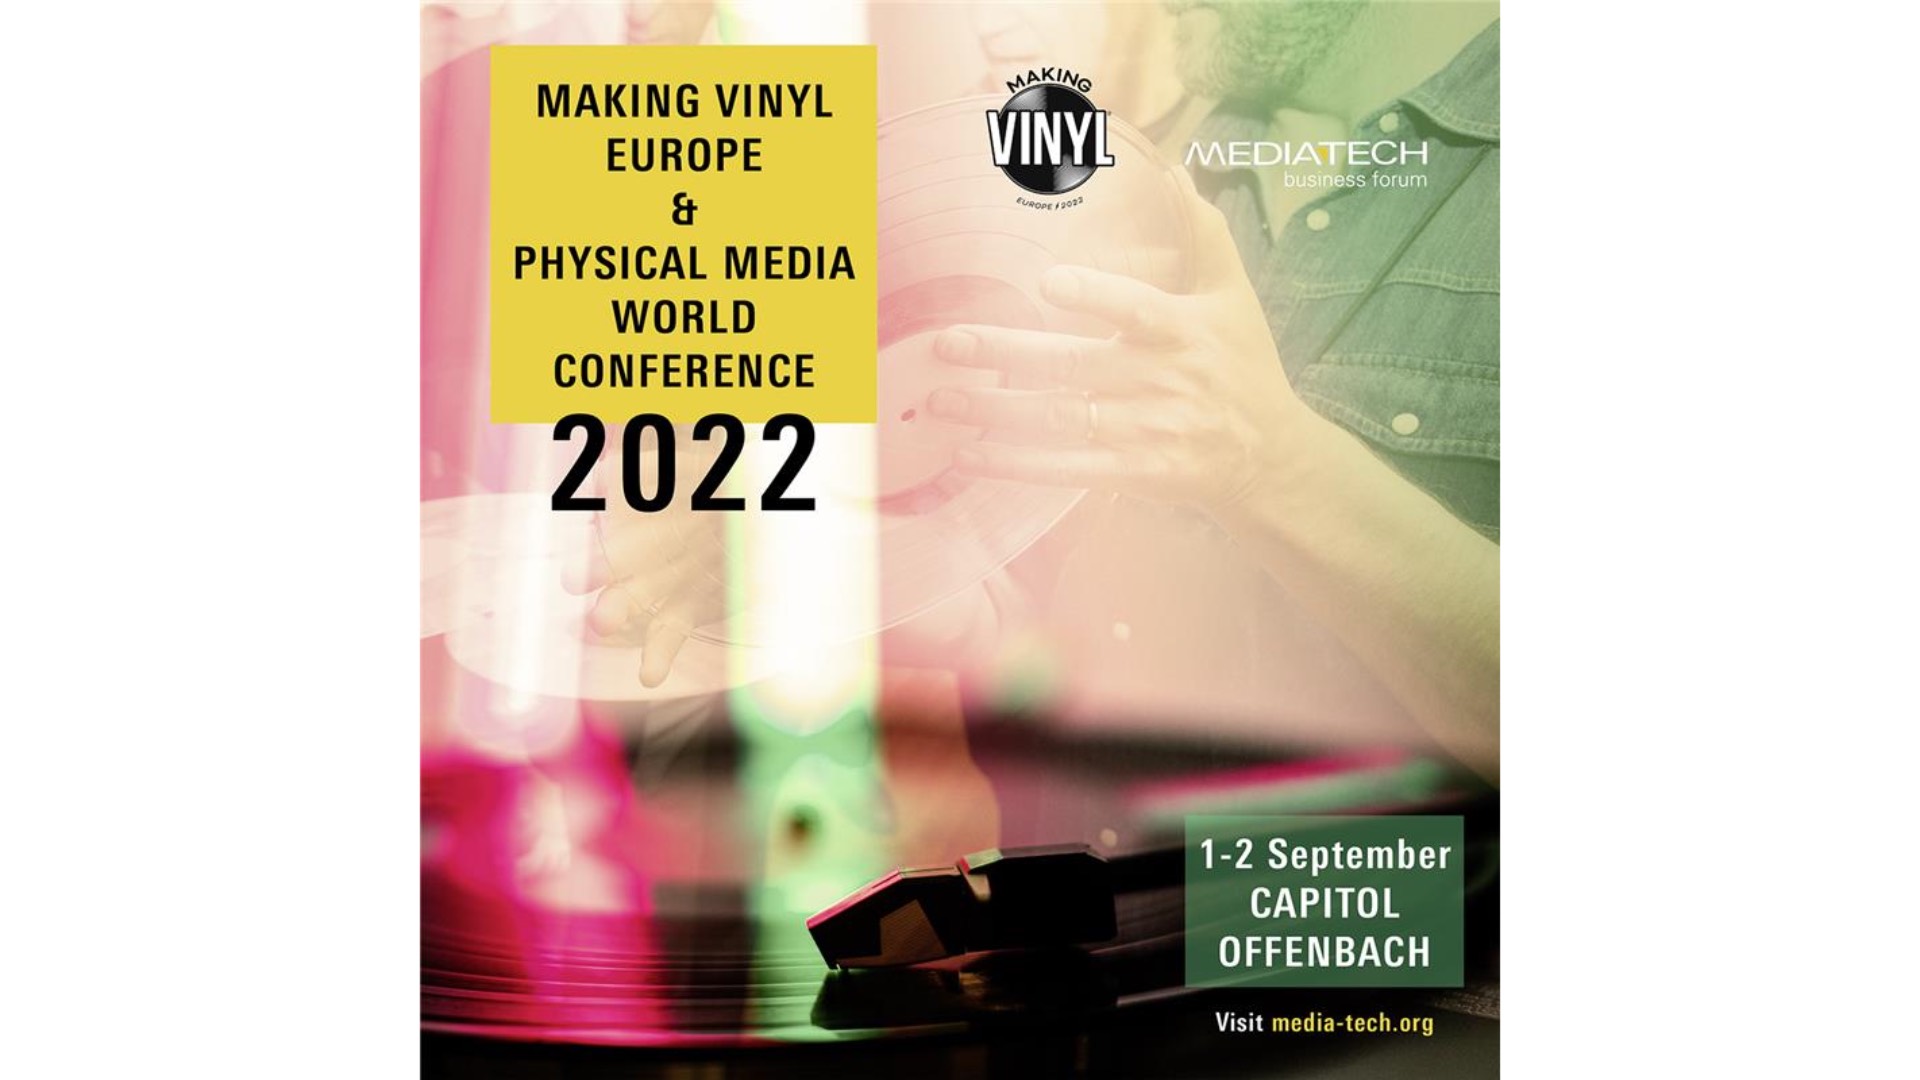 The event is only open to expert visitors will take place in Offenbach, Germany on September 1 and 2, 2022. 